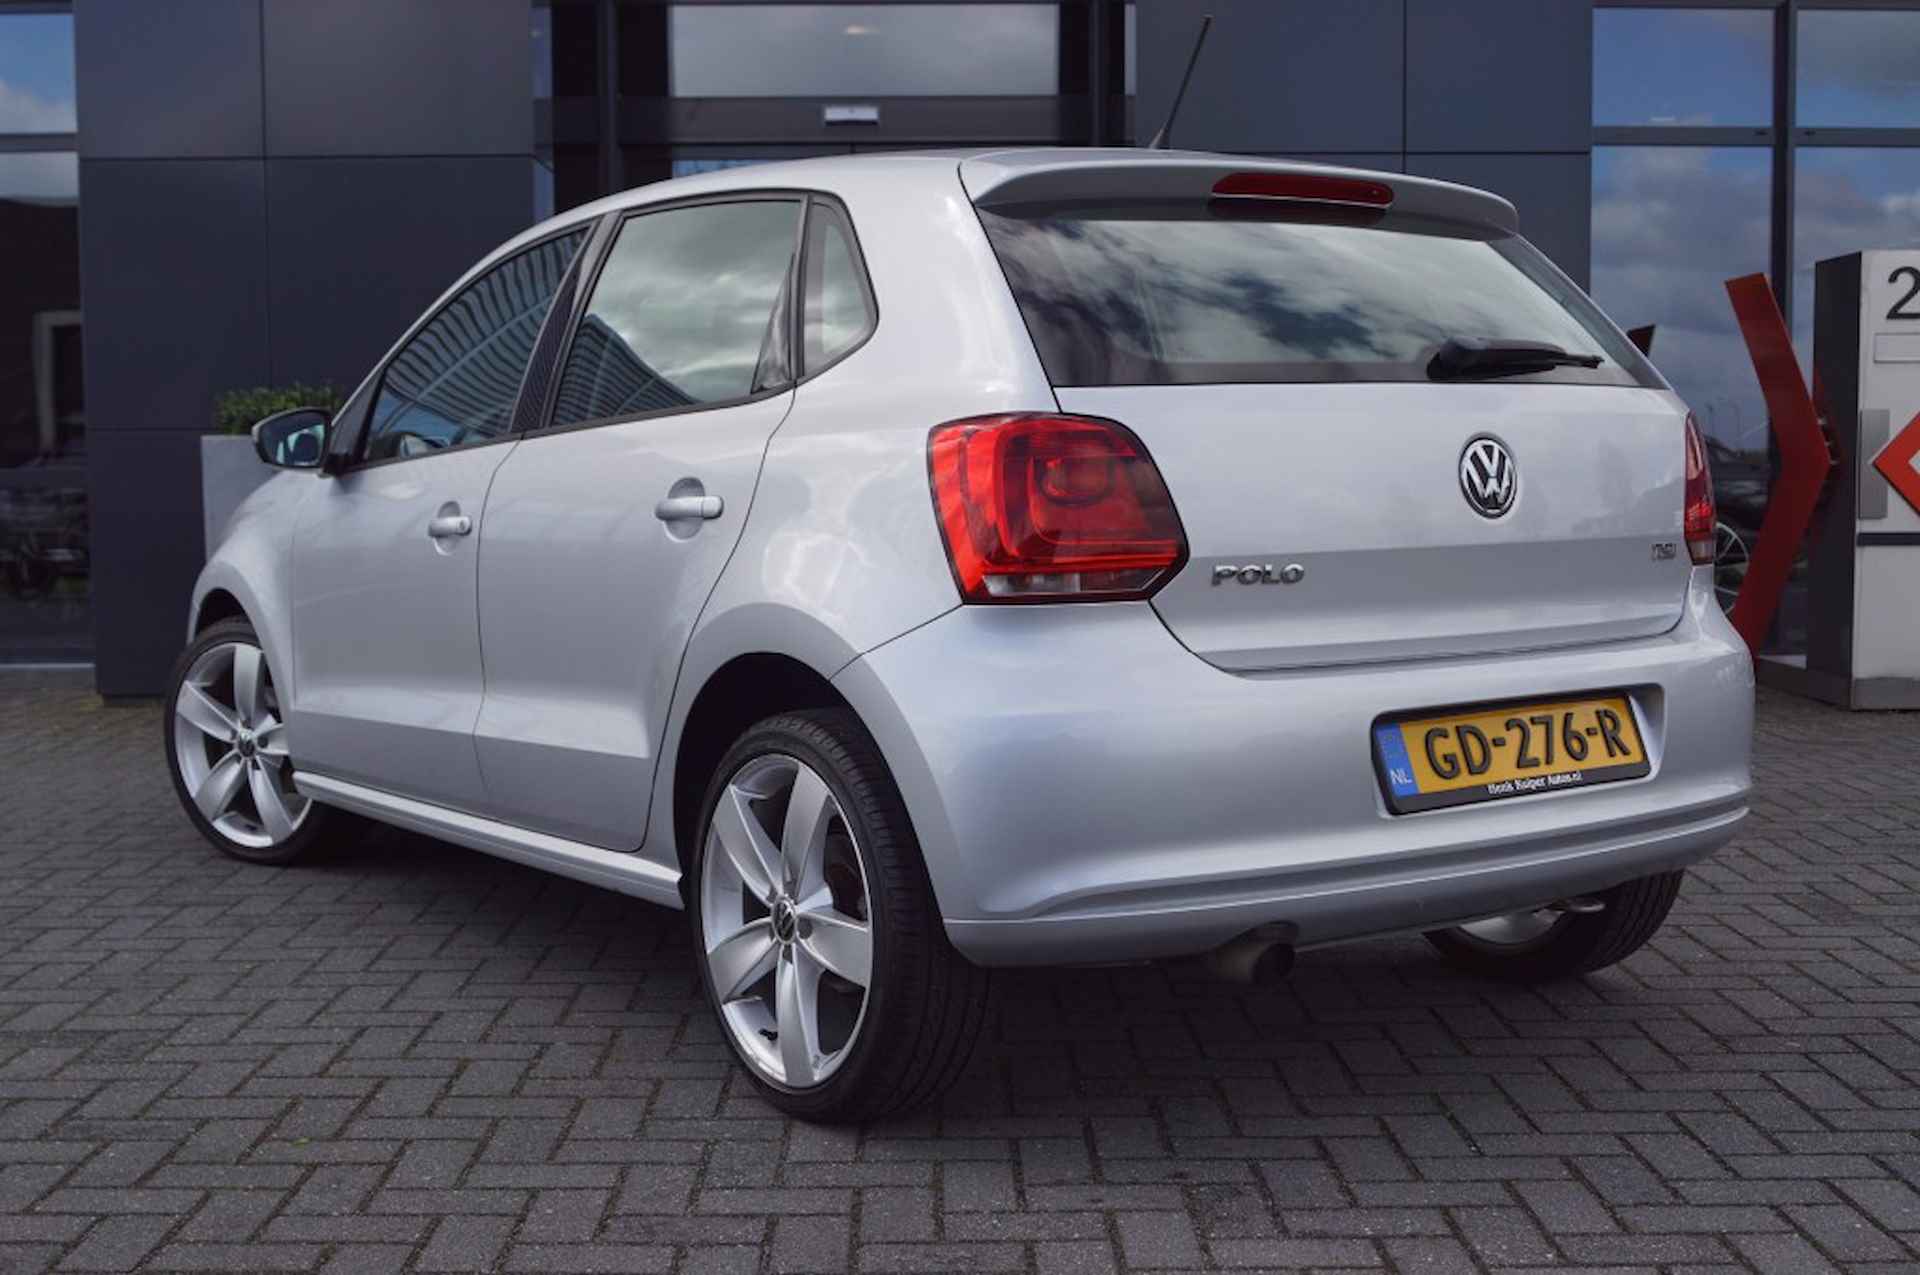 VOLKSWAGEN Polo 1.2 TSI Comfortline 90pk / Airconditioning / 17 LM/ nw. APK ! - 2/27